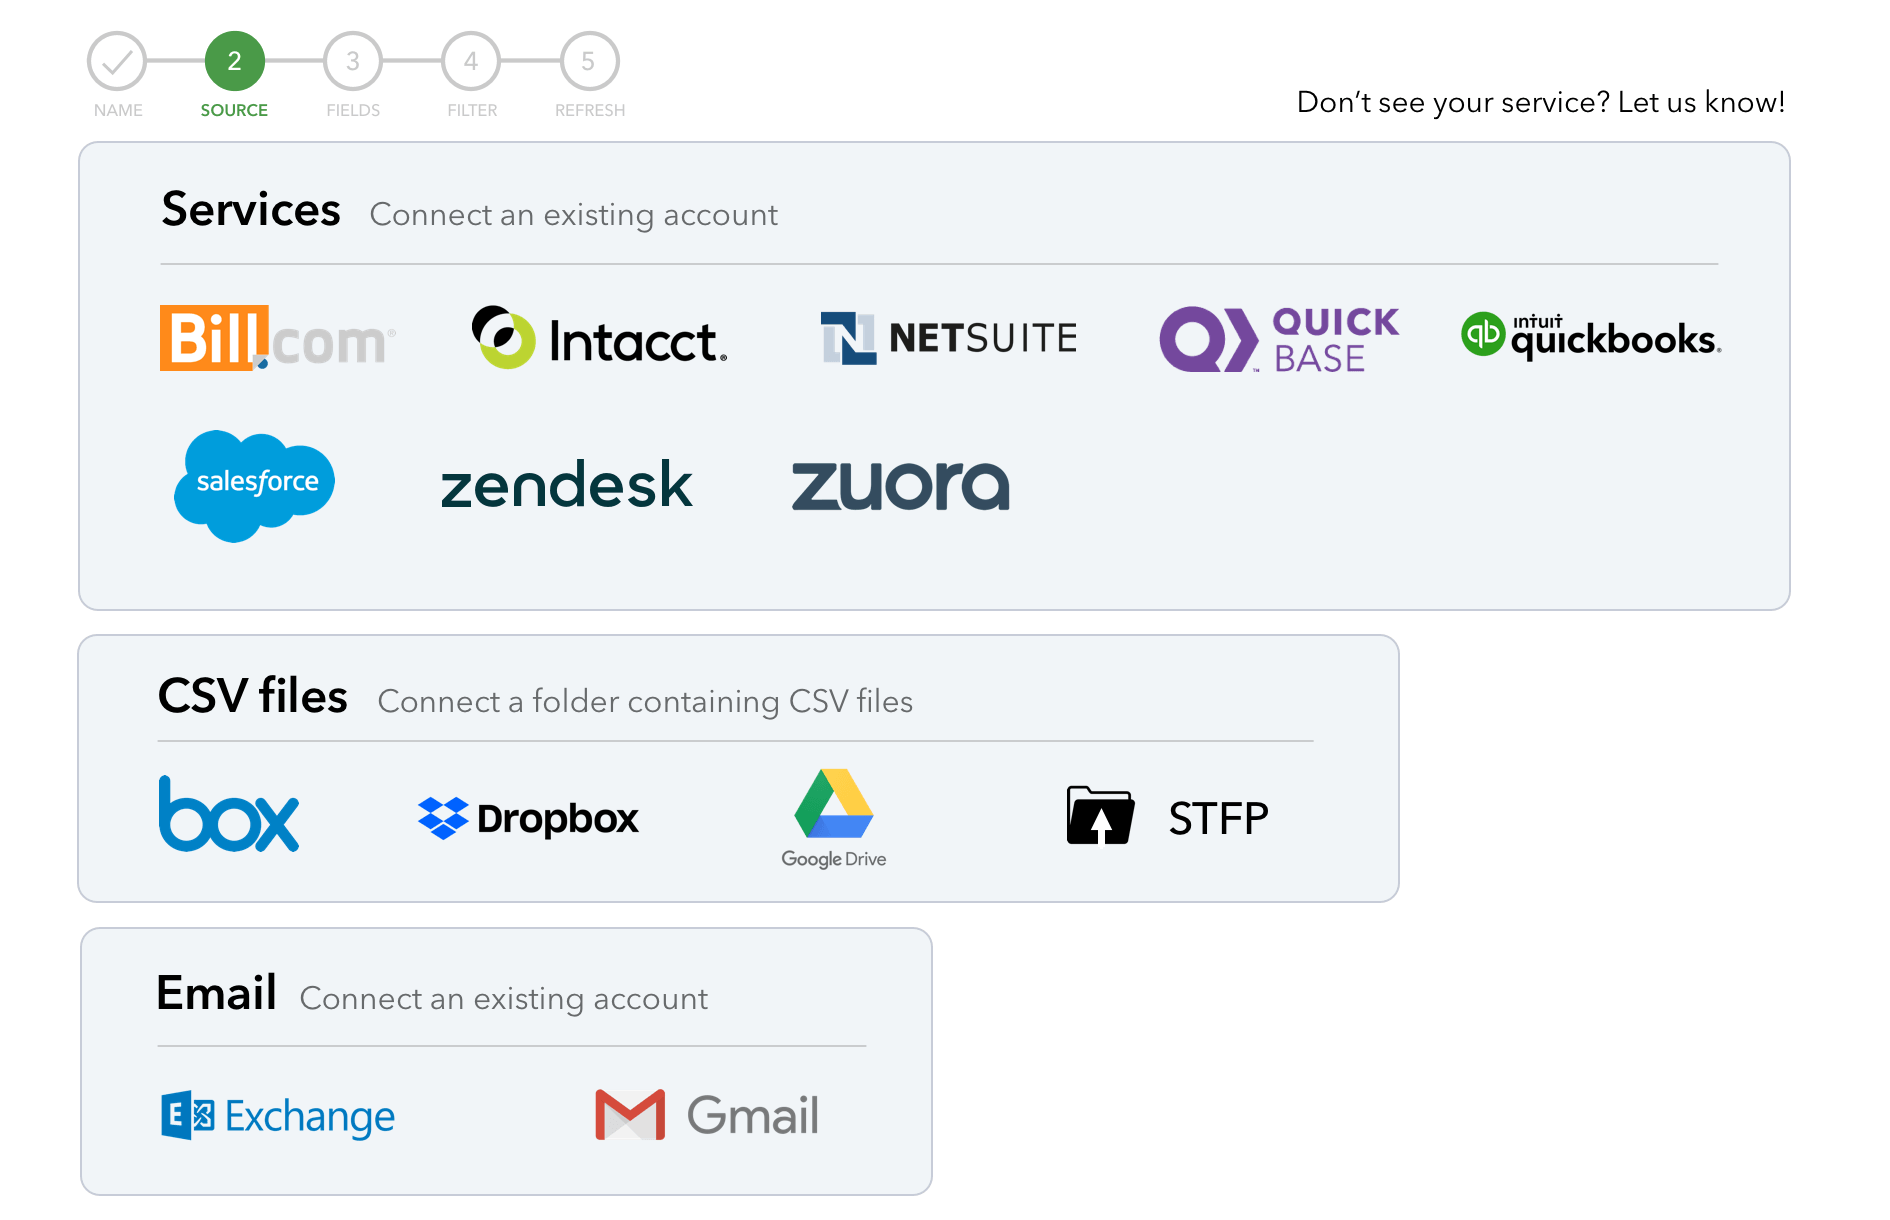 QuickBase Logo - Quick Base: The World's Most Loved Low-code Platform